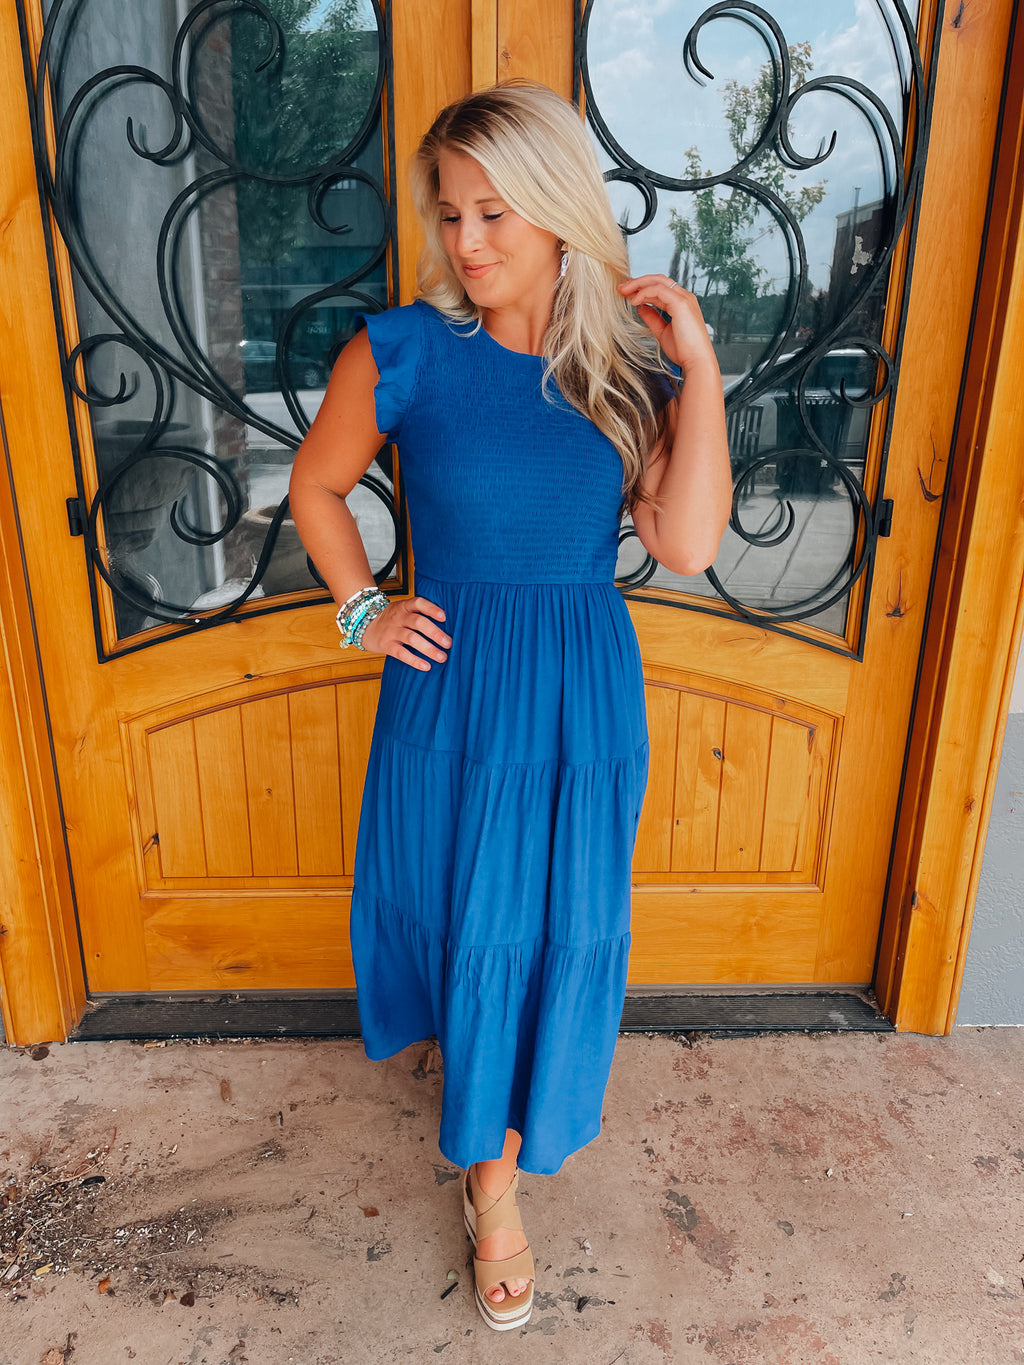 Look no further for your fave new dress: The Everlasting Love Midi is a royal blue ruffled dream, with smocked tiers and figure-flattering fit. Not to mention the stunning color – hearts will be aflutter! You'll be the belle of the ball in this flirty, fun ensemble.